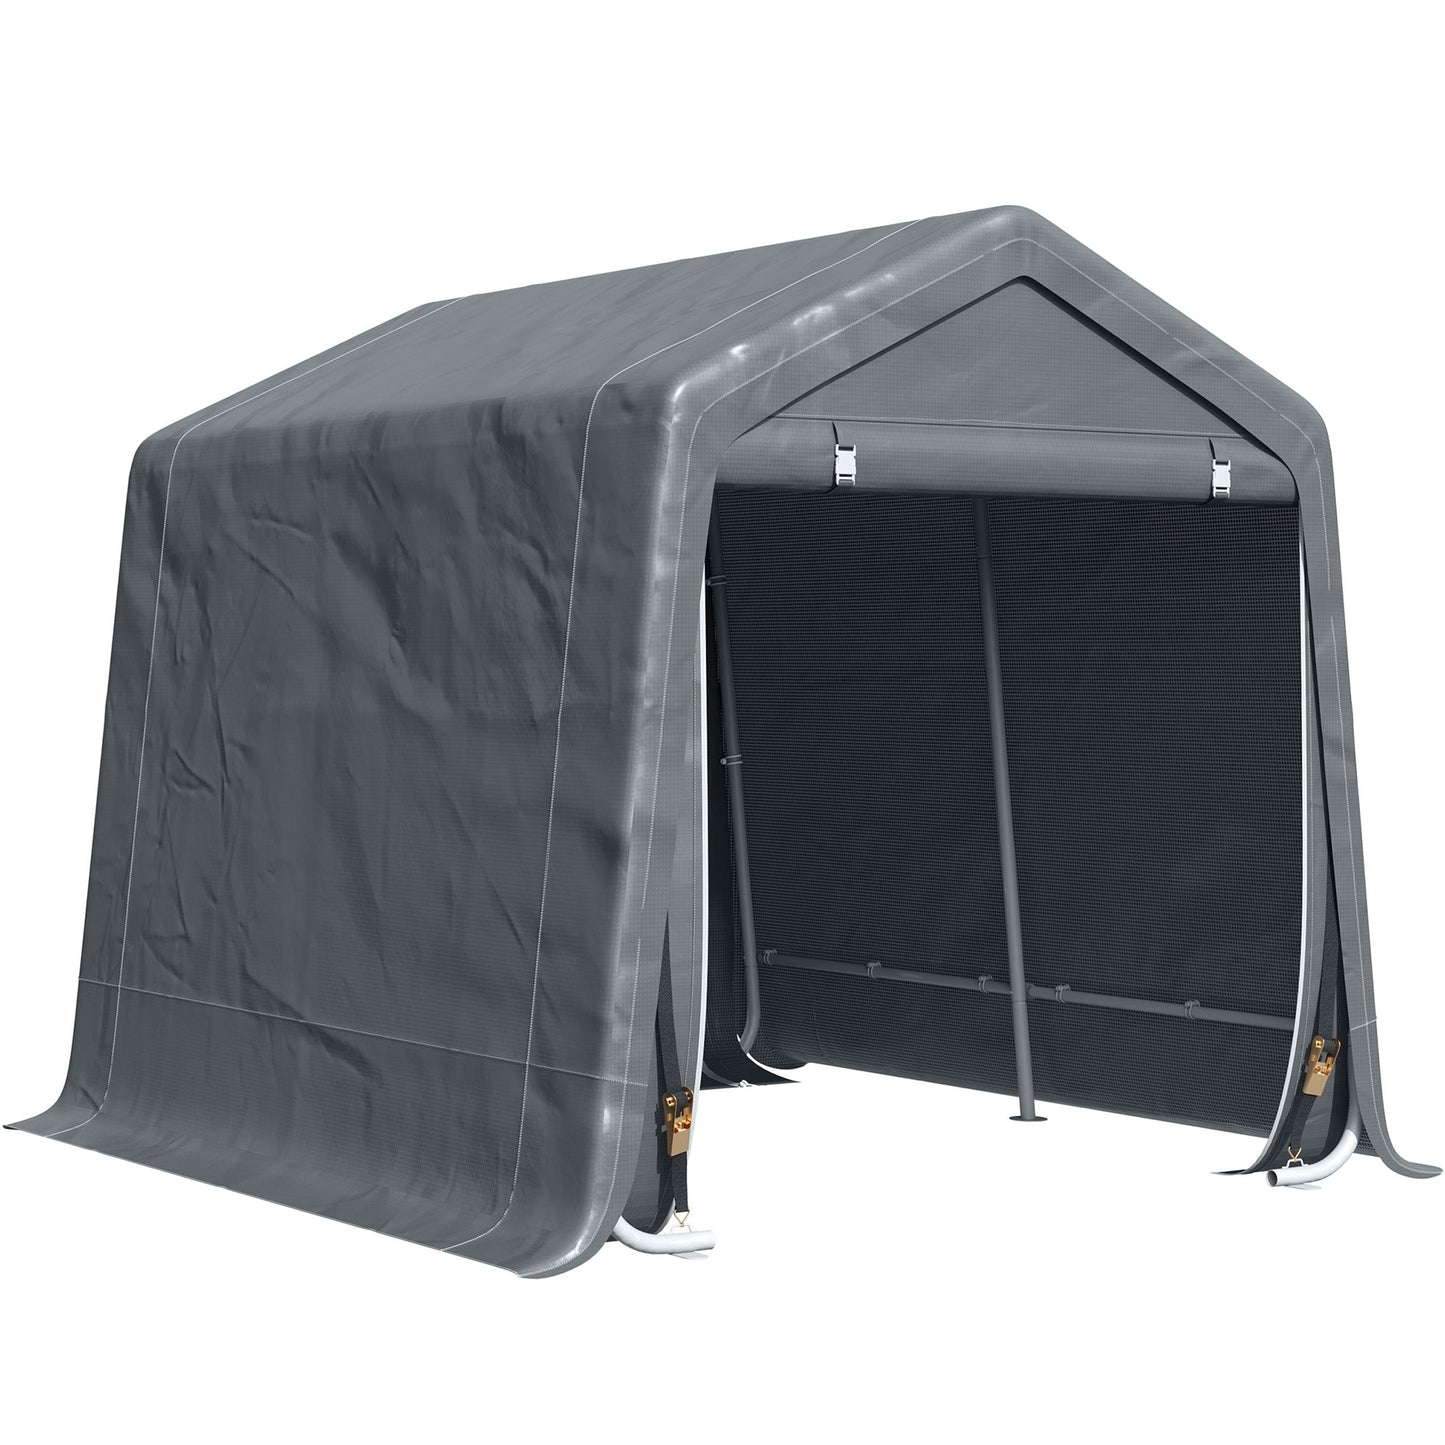 Outdoor and Garden-9.2' x 7.9' Garden Storage Tent, Heavy Duty Bike Shed, Patio Storage Shelter w/ Metal Frame and Double Zipper Doors, Dark Grey - Outdoor Style Company